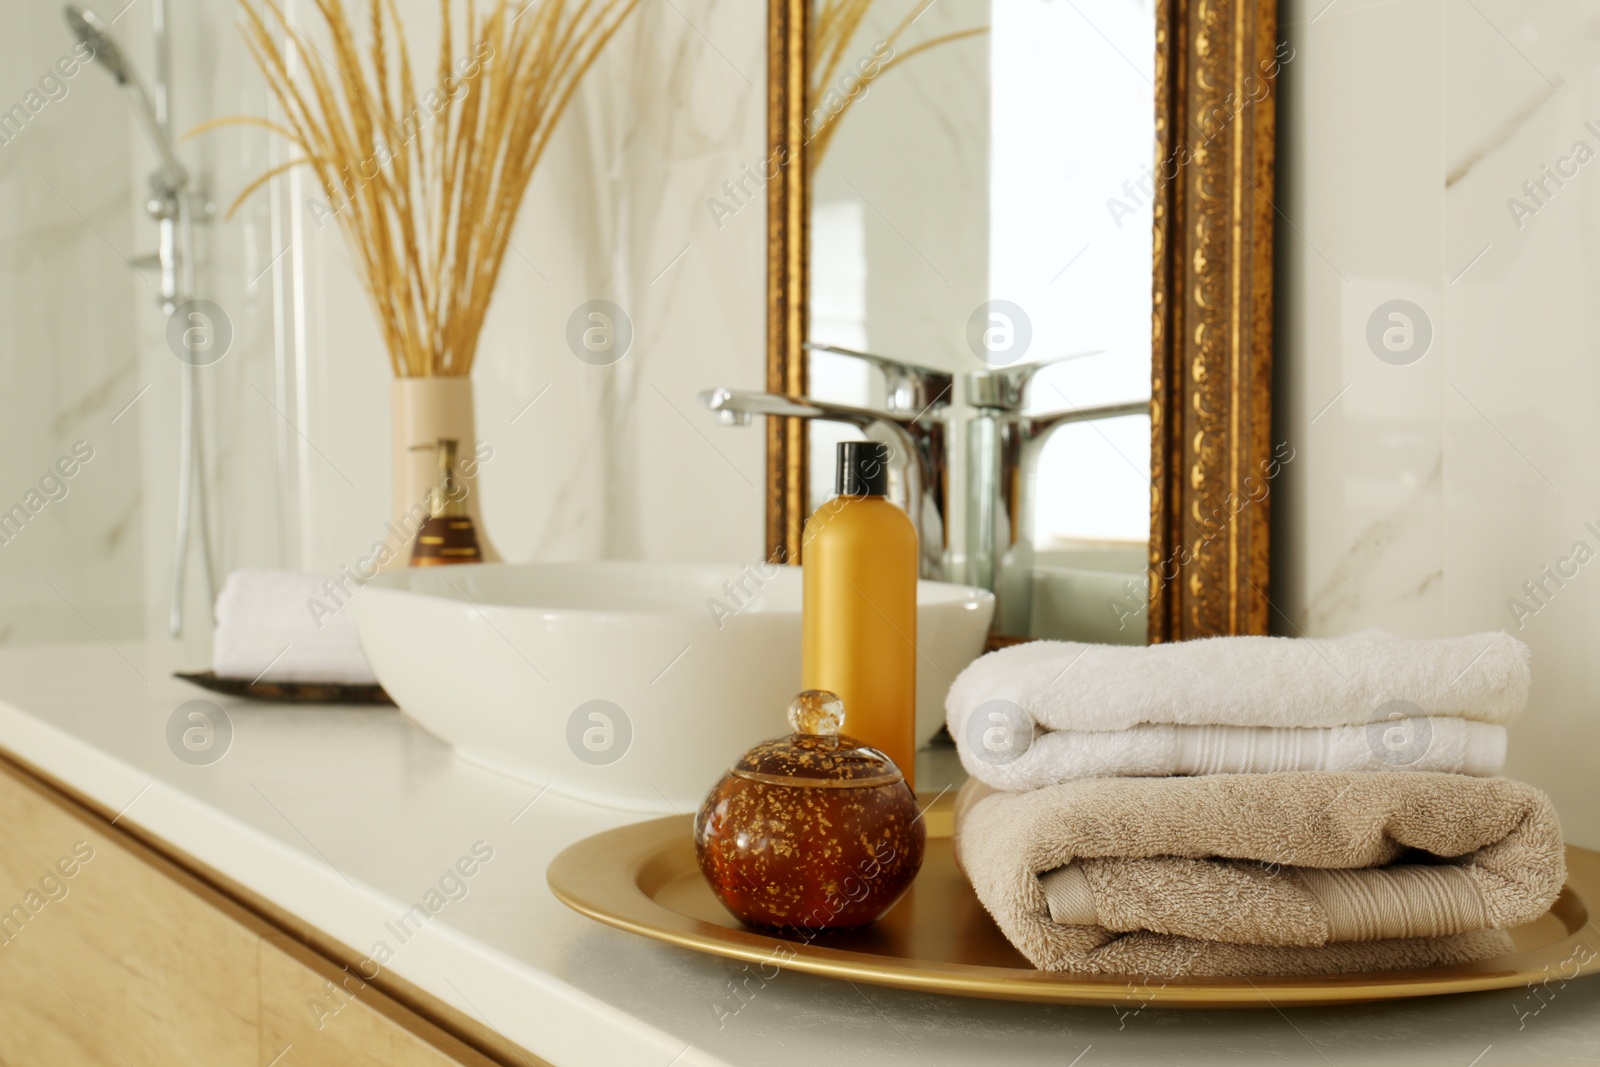 Photo of Toiletries and towels on white countertop near mirror in bathroom